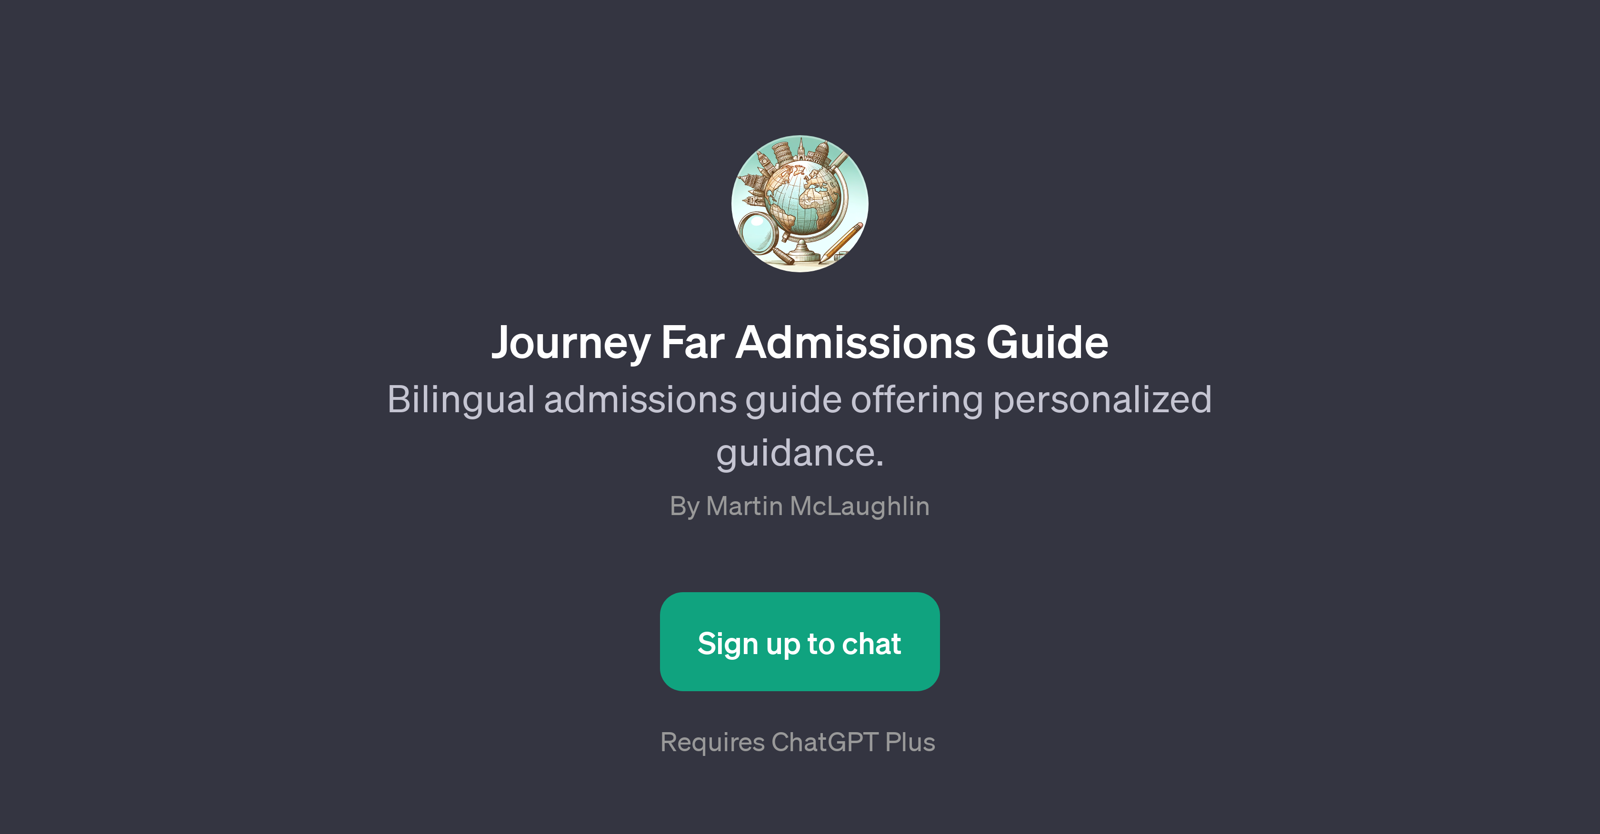 Journey Far Admissions Guide website